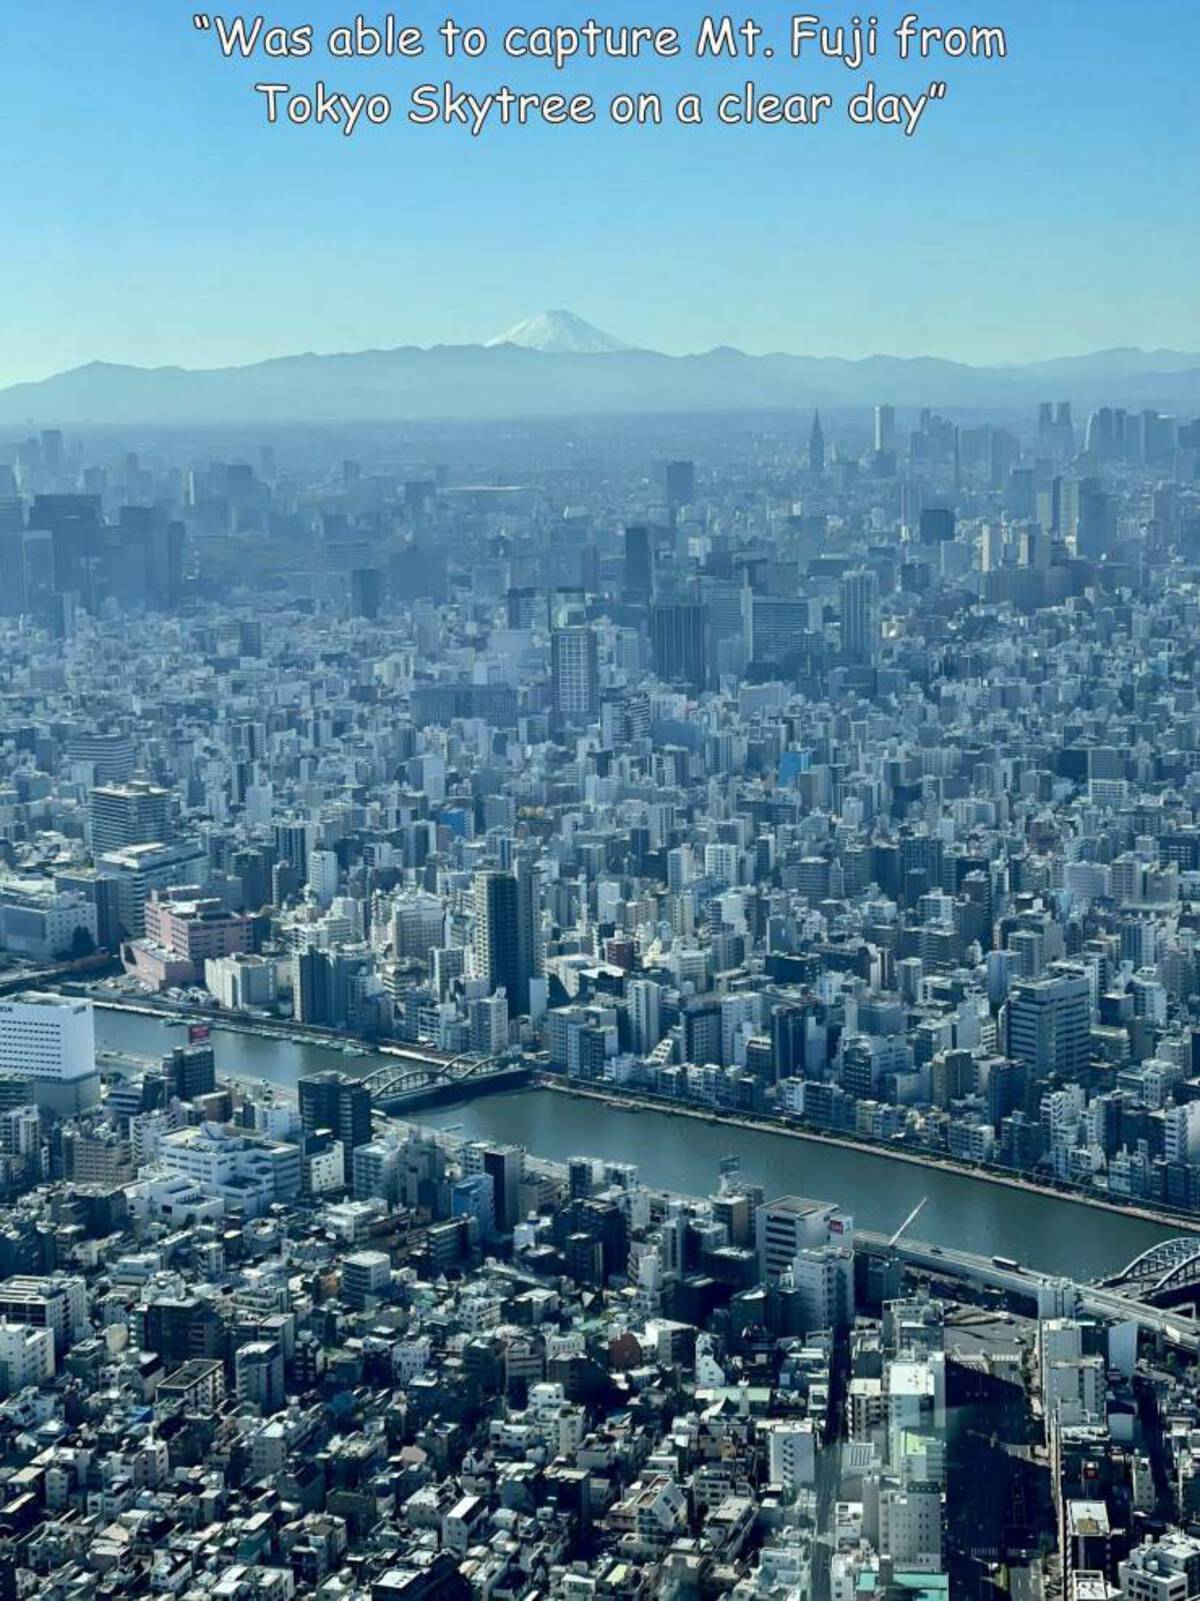 tokyo skytree - "Was able to capture Mt. Fuji from Tokyo Skytree on a clear day" Foarte Alls